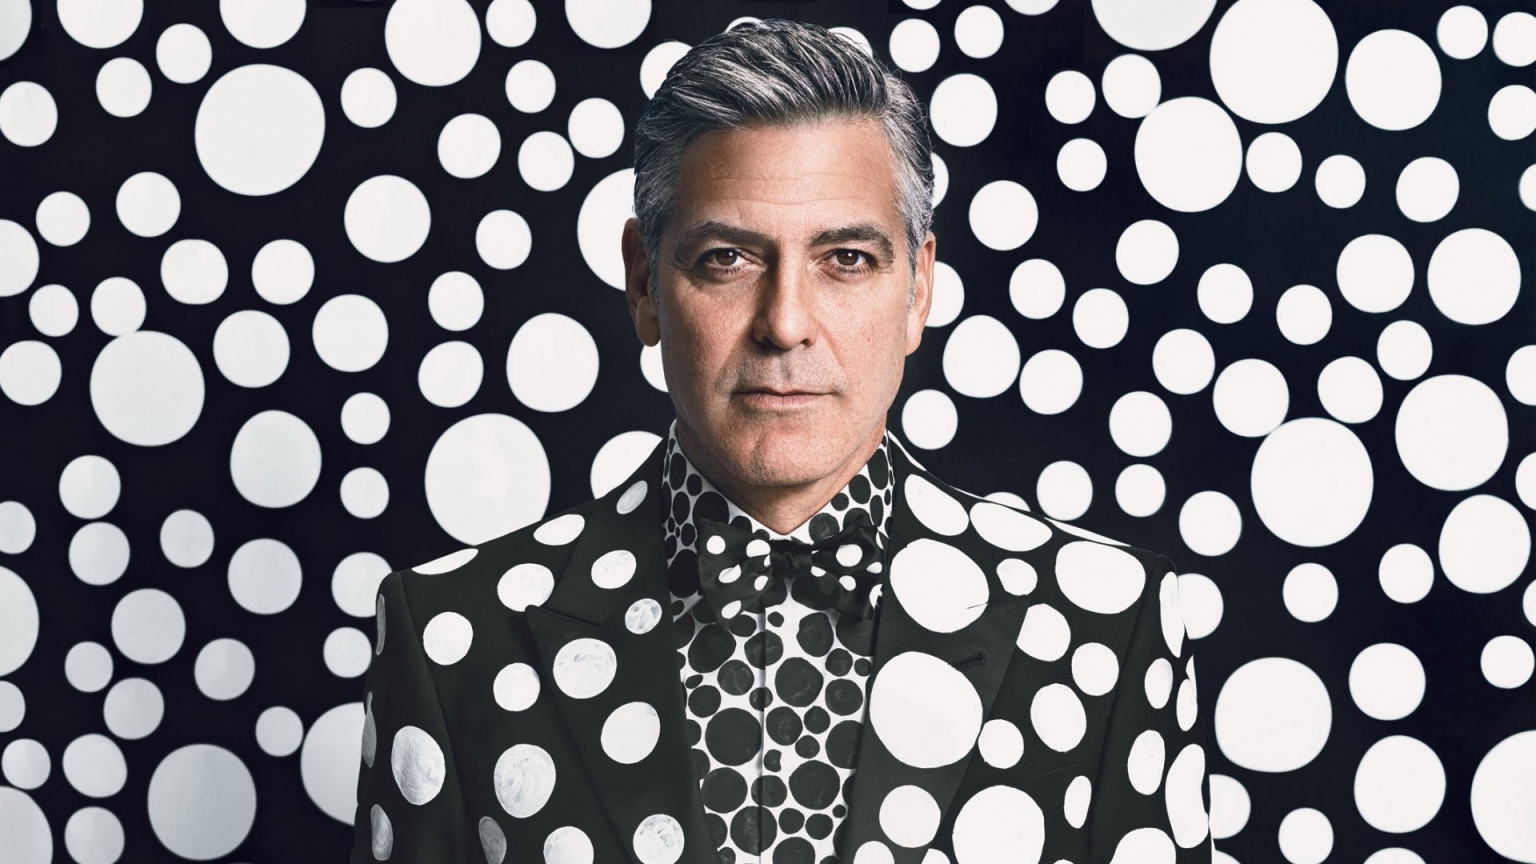 George Clooney Portrait for 1536 x 864 HDTV resolution